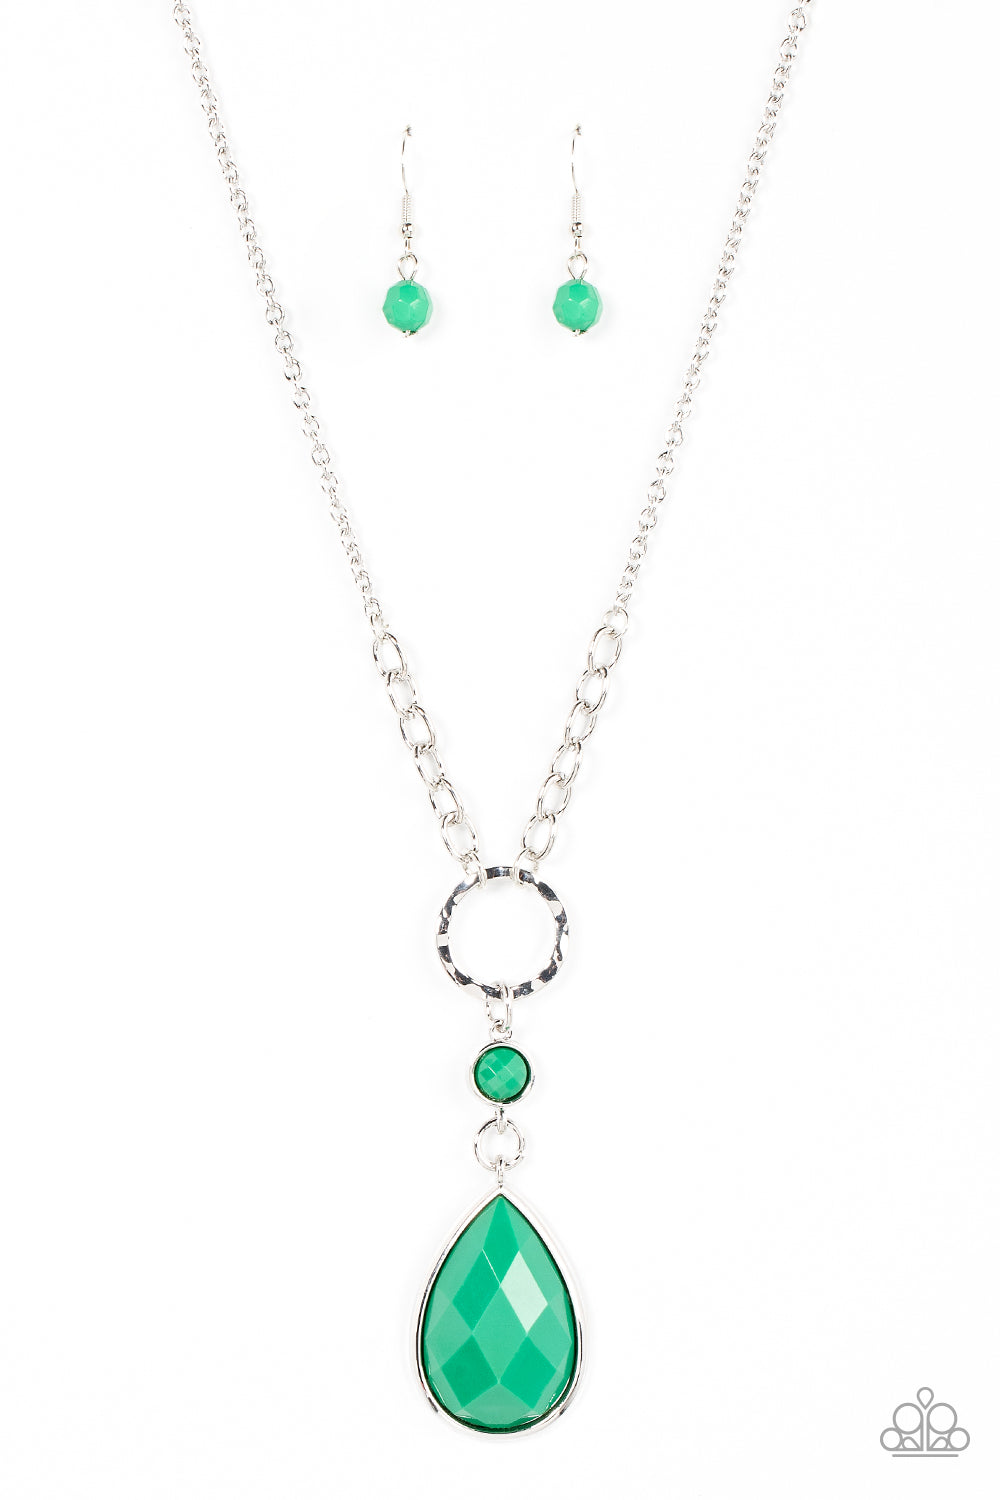 Paparazzi Necklaces - Valley Girl Glamour - Green